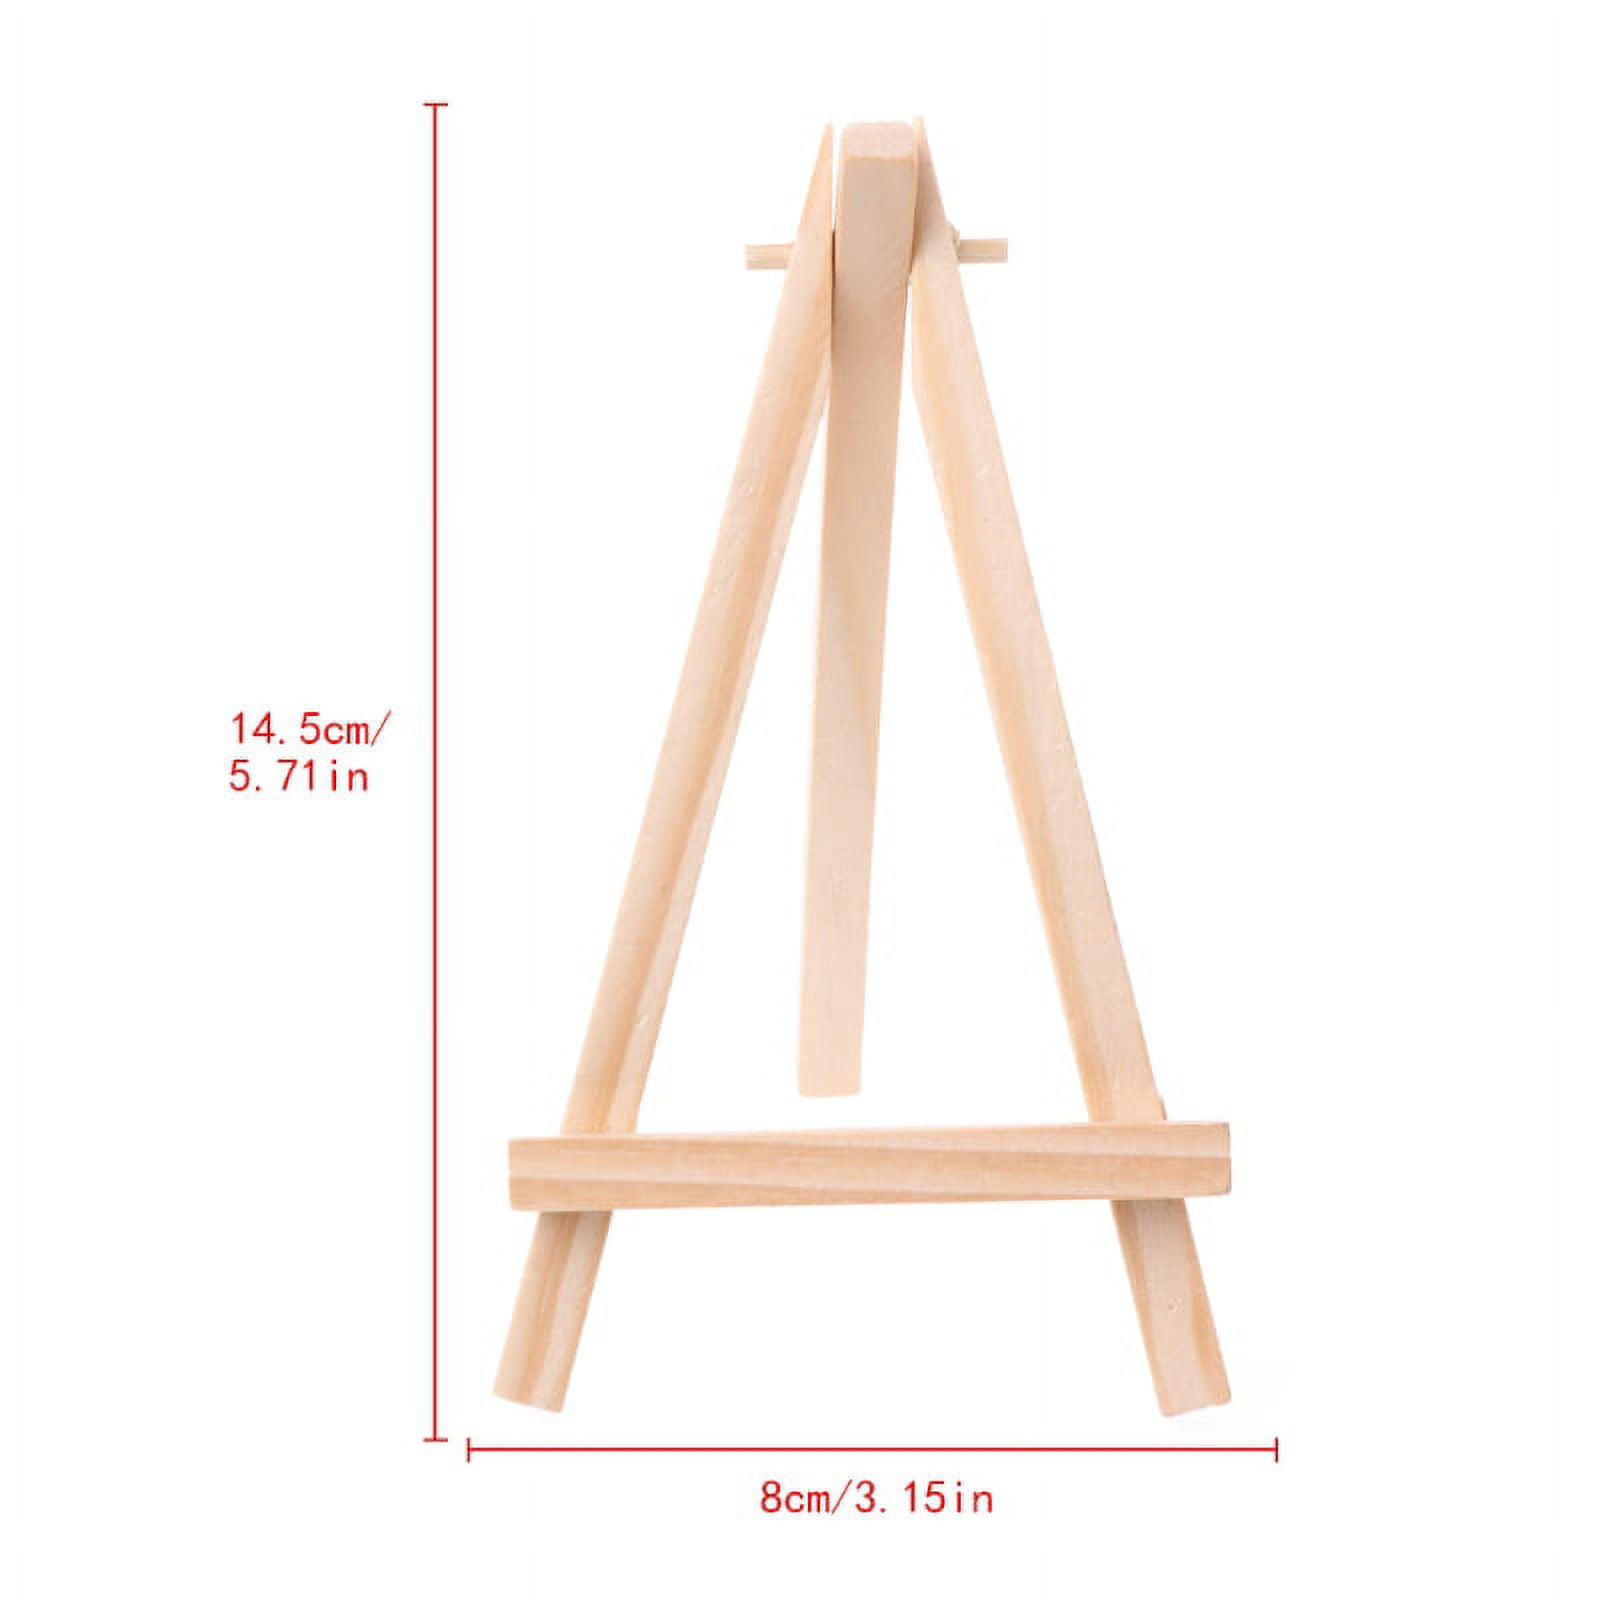 3 Canvas With Mini Wood Pallets Display Easel Artist Tripod Tabletop Holder  Stand For Painting Kids Crafts Photos KDJK2302 From Santi, $0.45